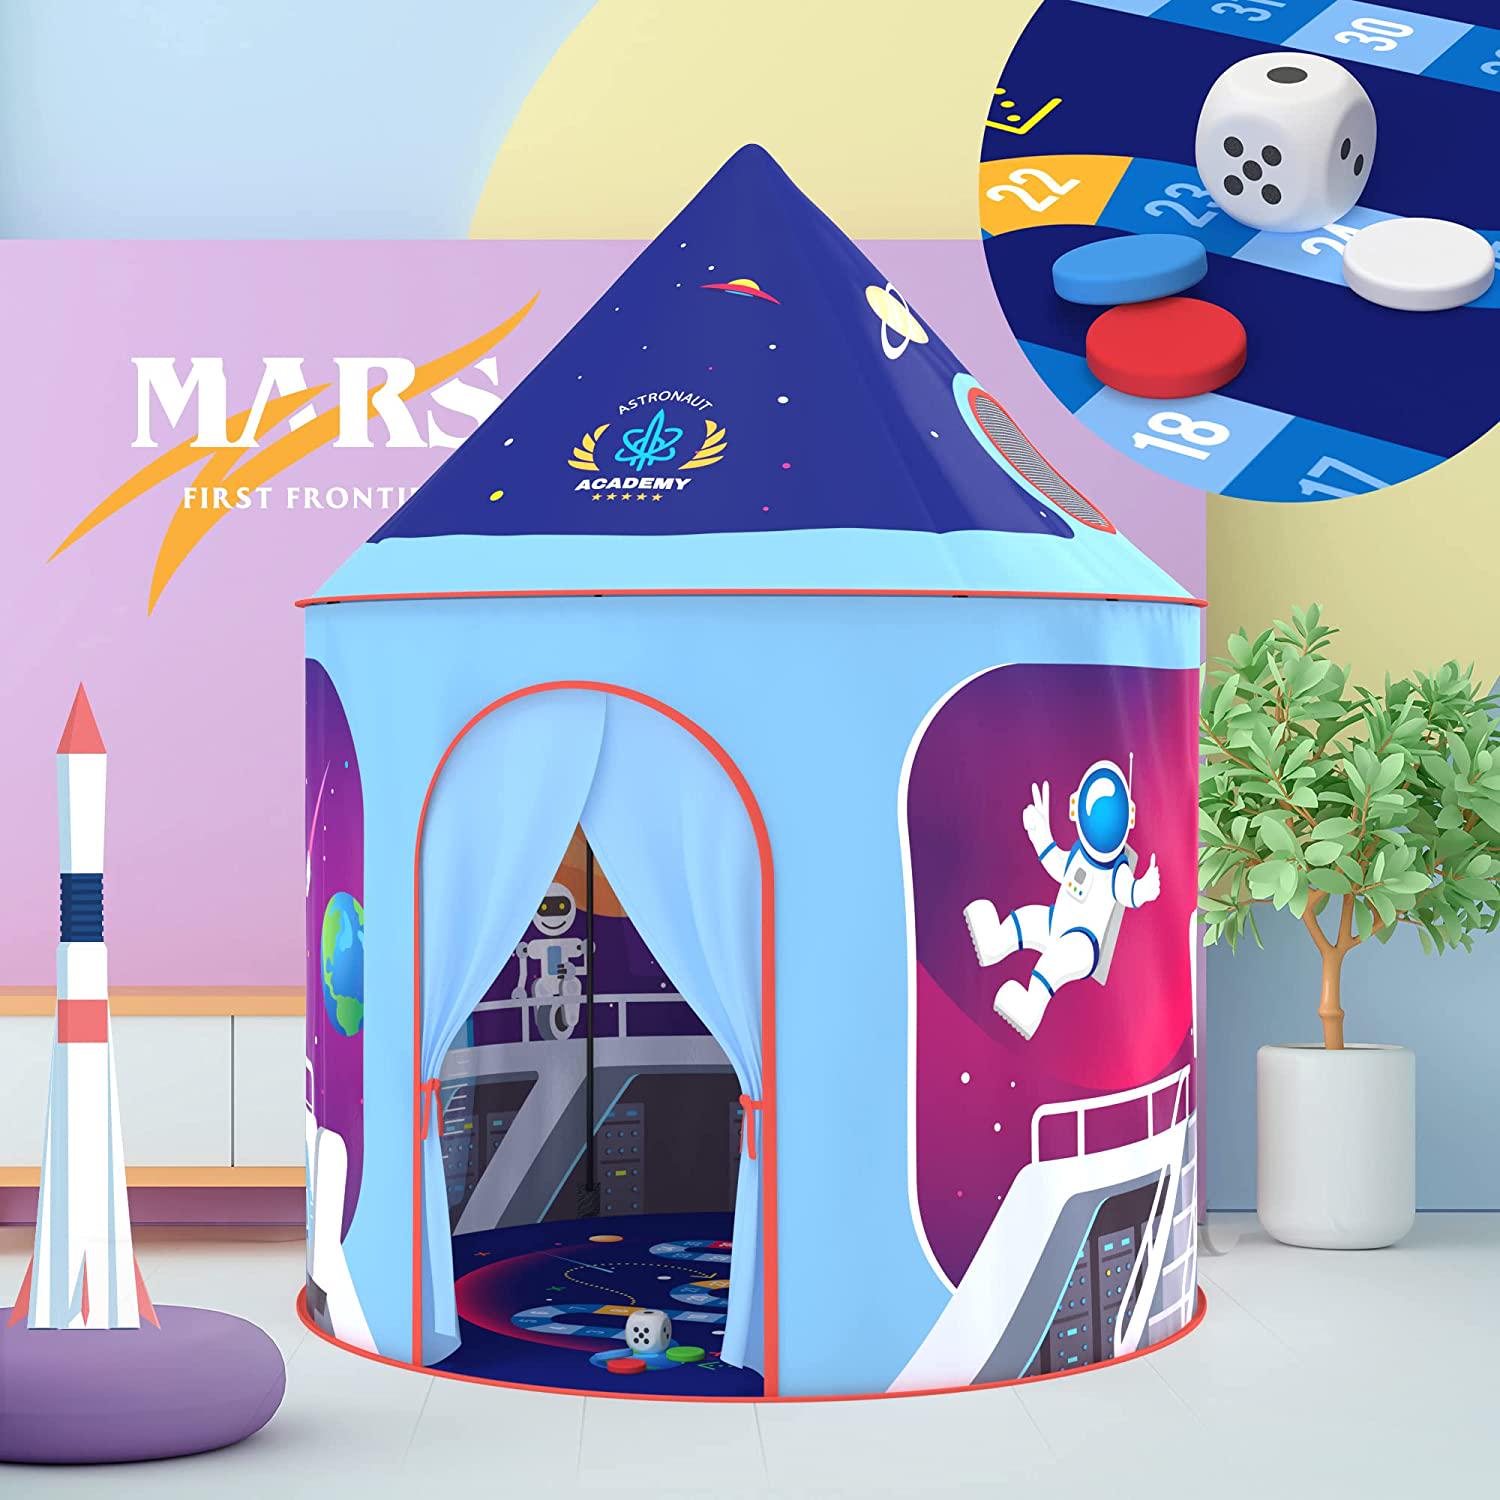 KIDFUL, KIDFUL Space Mission Kids Tent + Board Game Inside, Mission to Mars Rocket Play Tent for Boys with Planets, Stars, Robots, and Cockpit